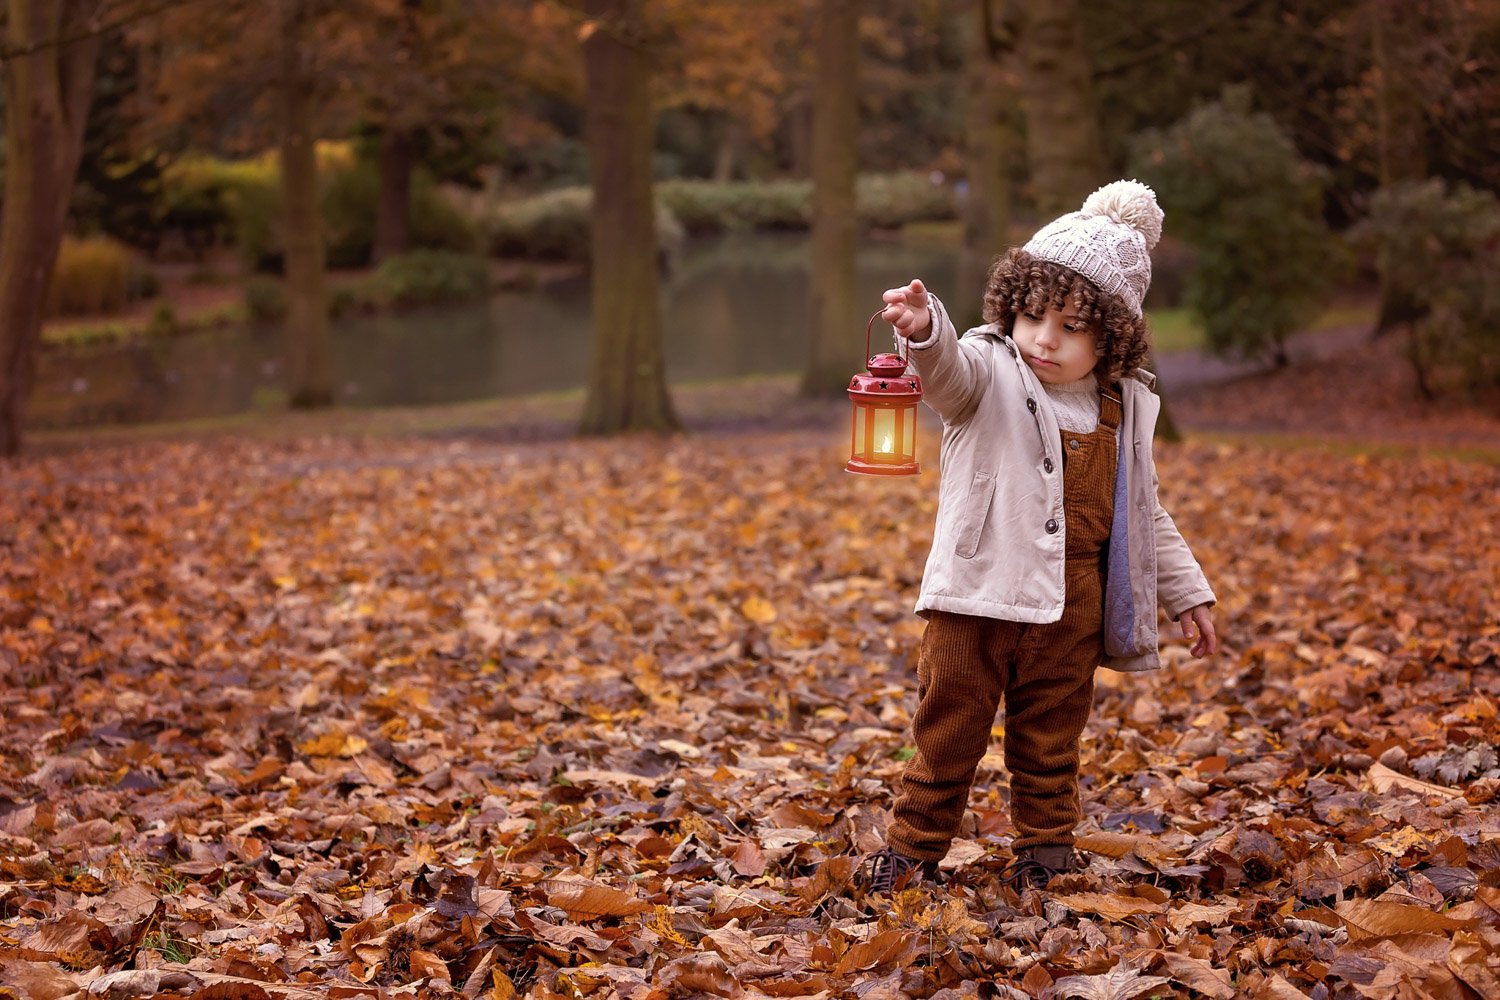 Autumn Mini Sessions in Leeds, Yorkshire